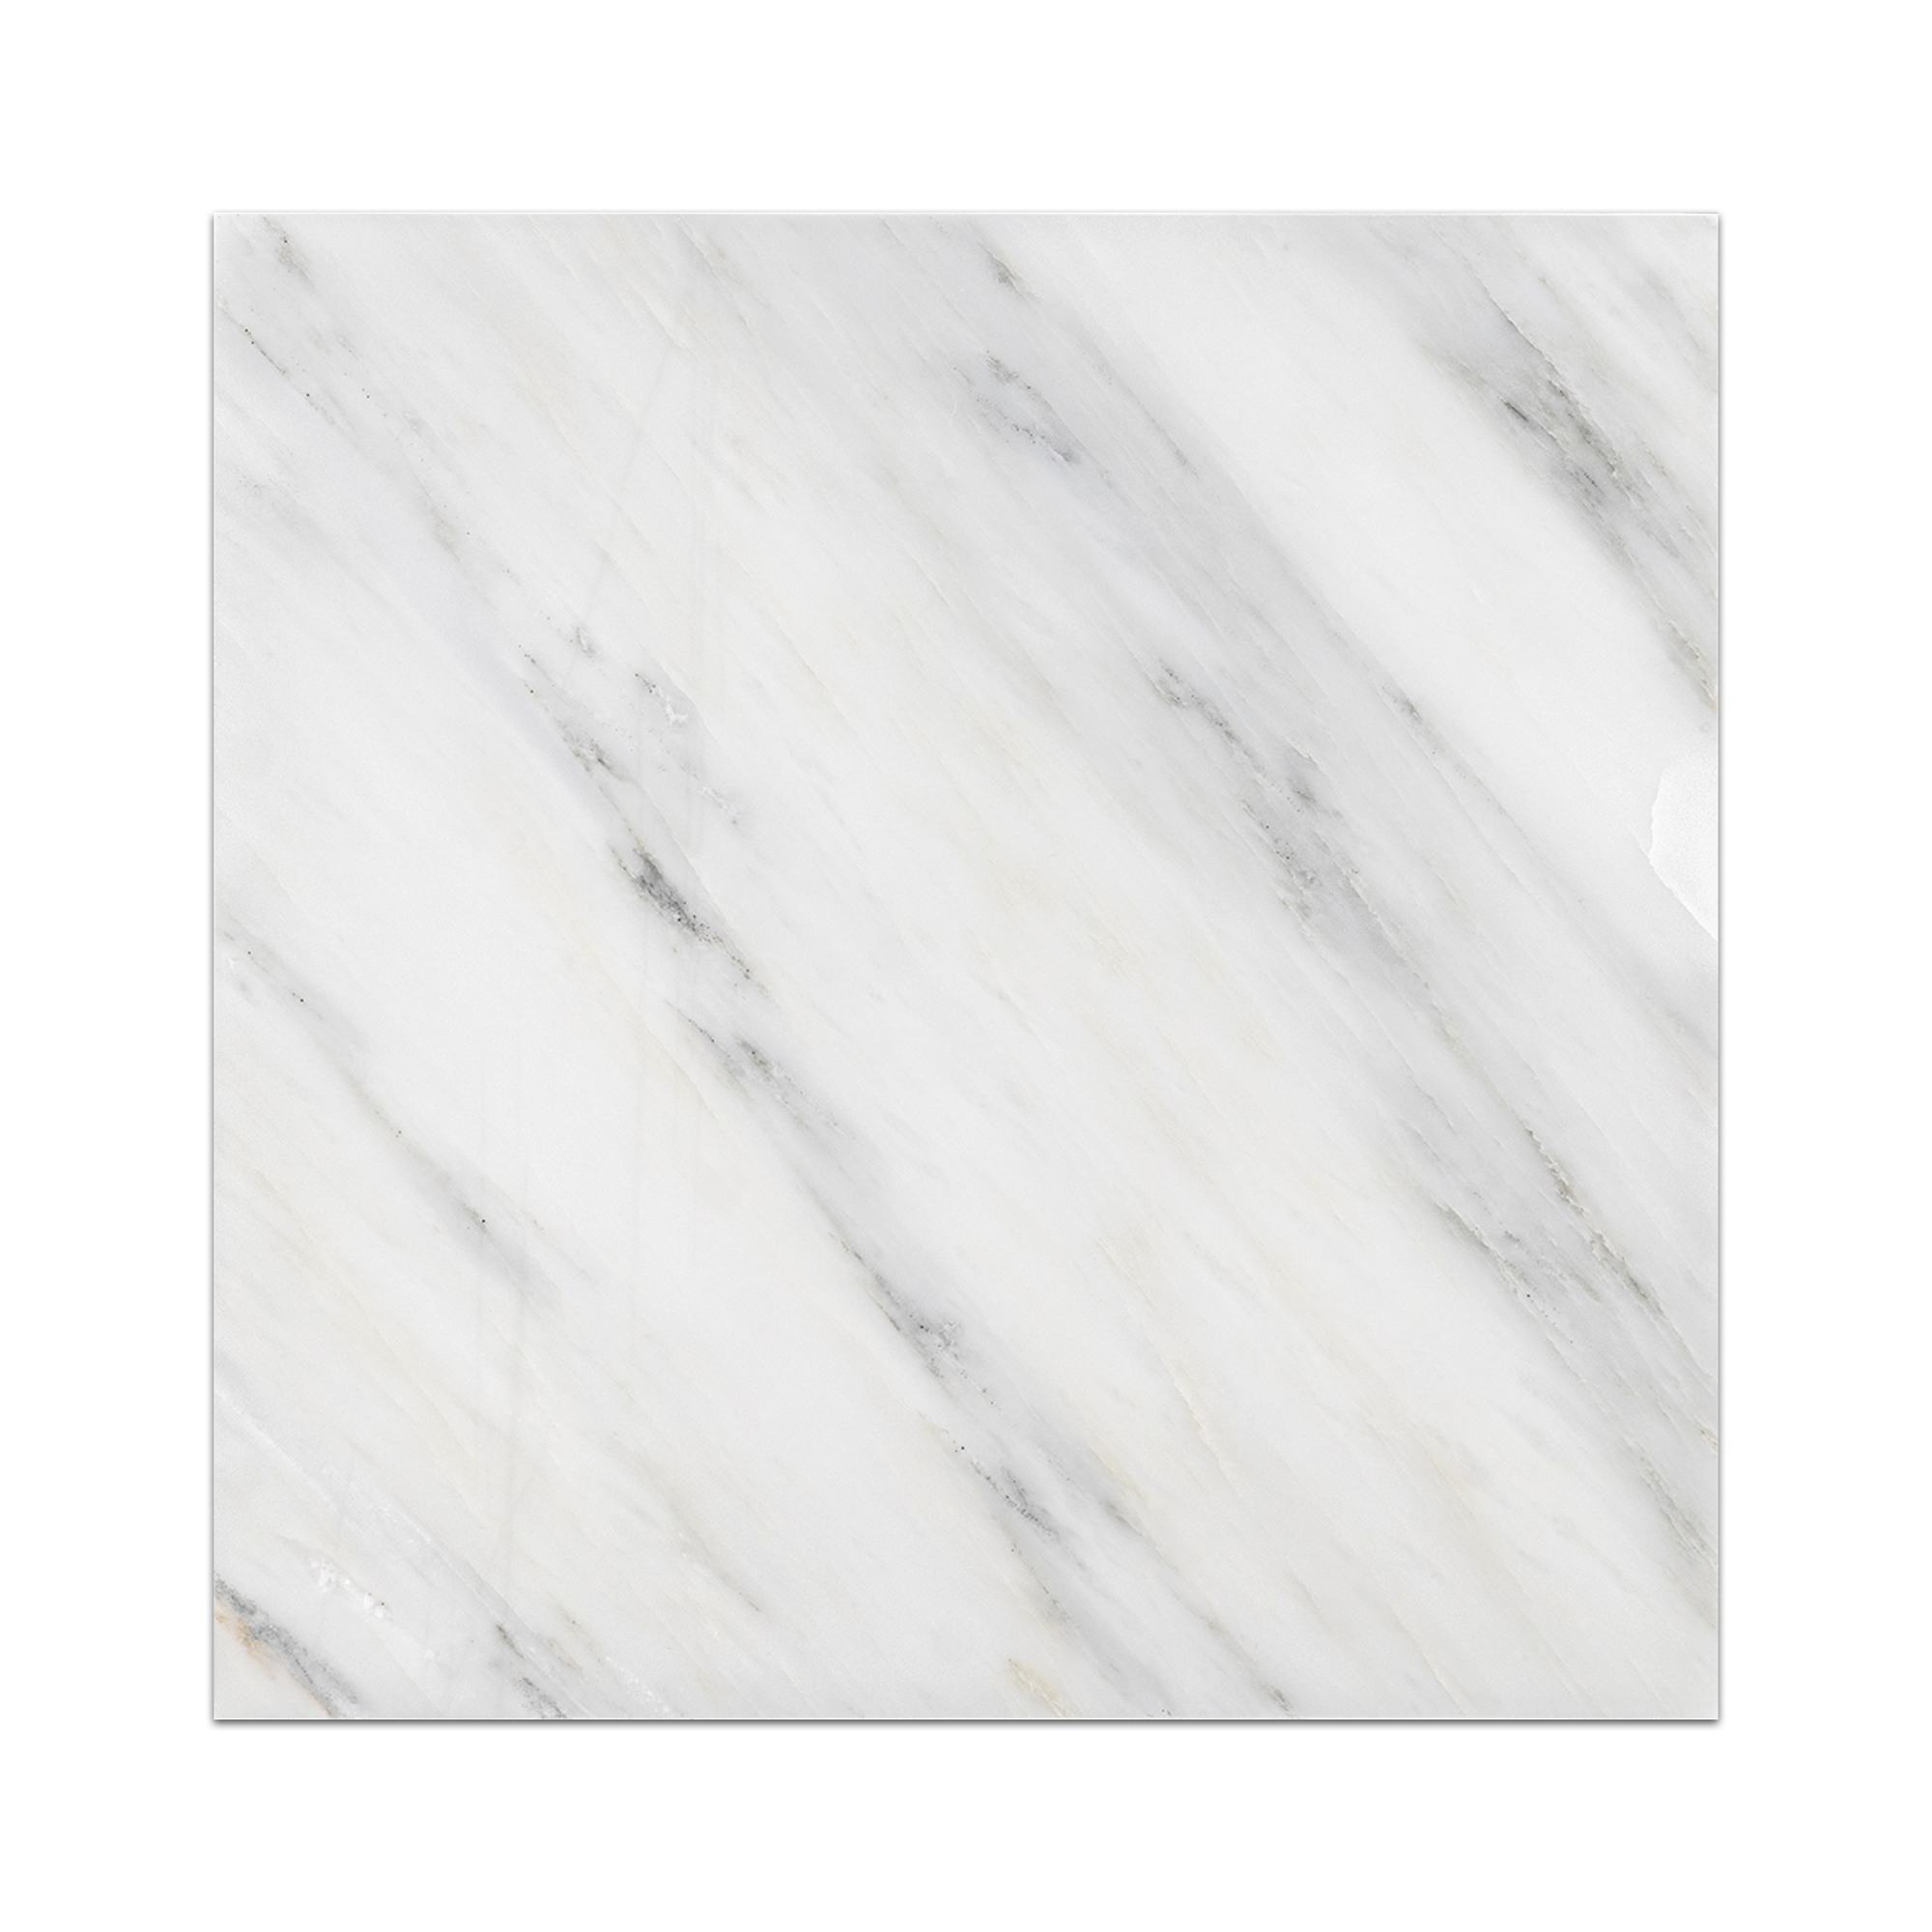 Elon Pearl White Marble Square Field Tile 12x12x0.375 Polished - AM8604P Surface Group International Product